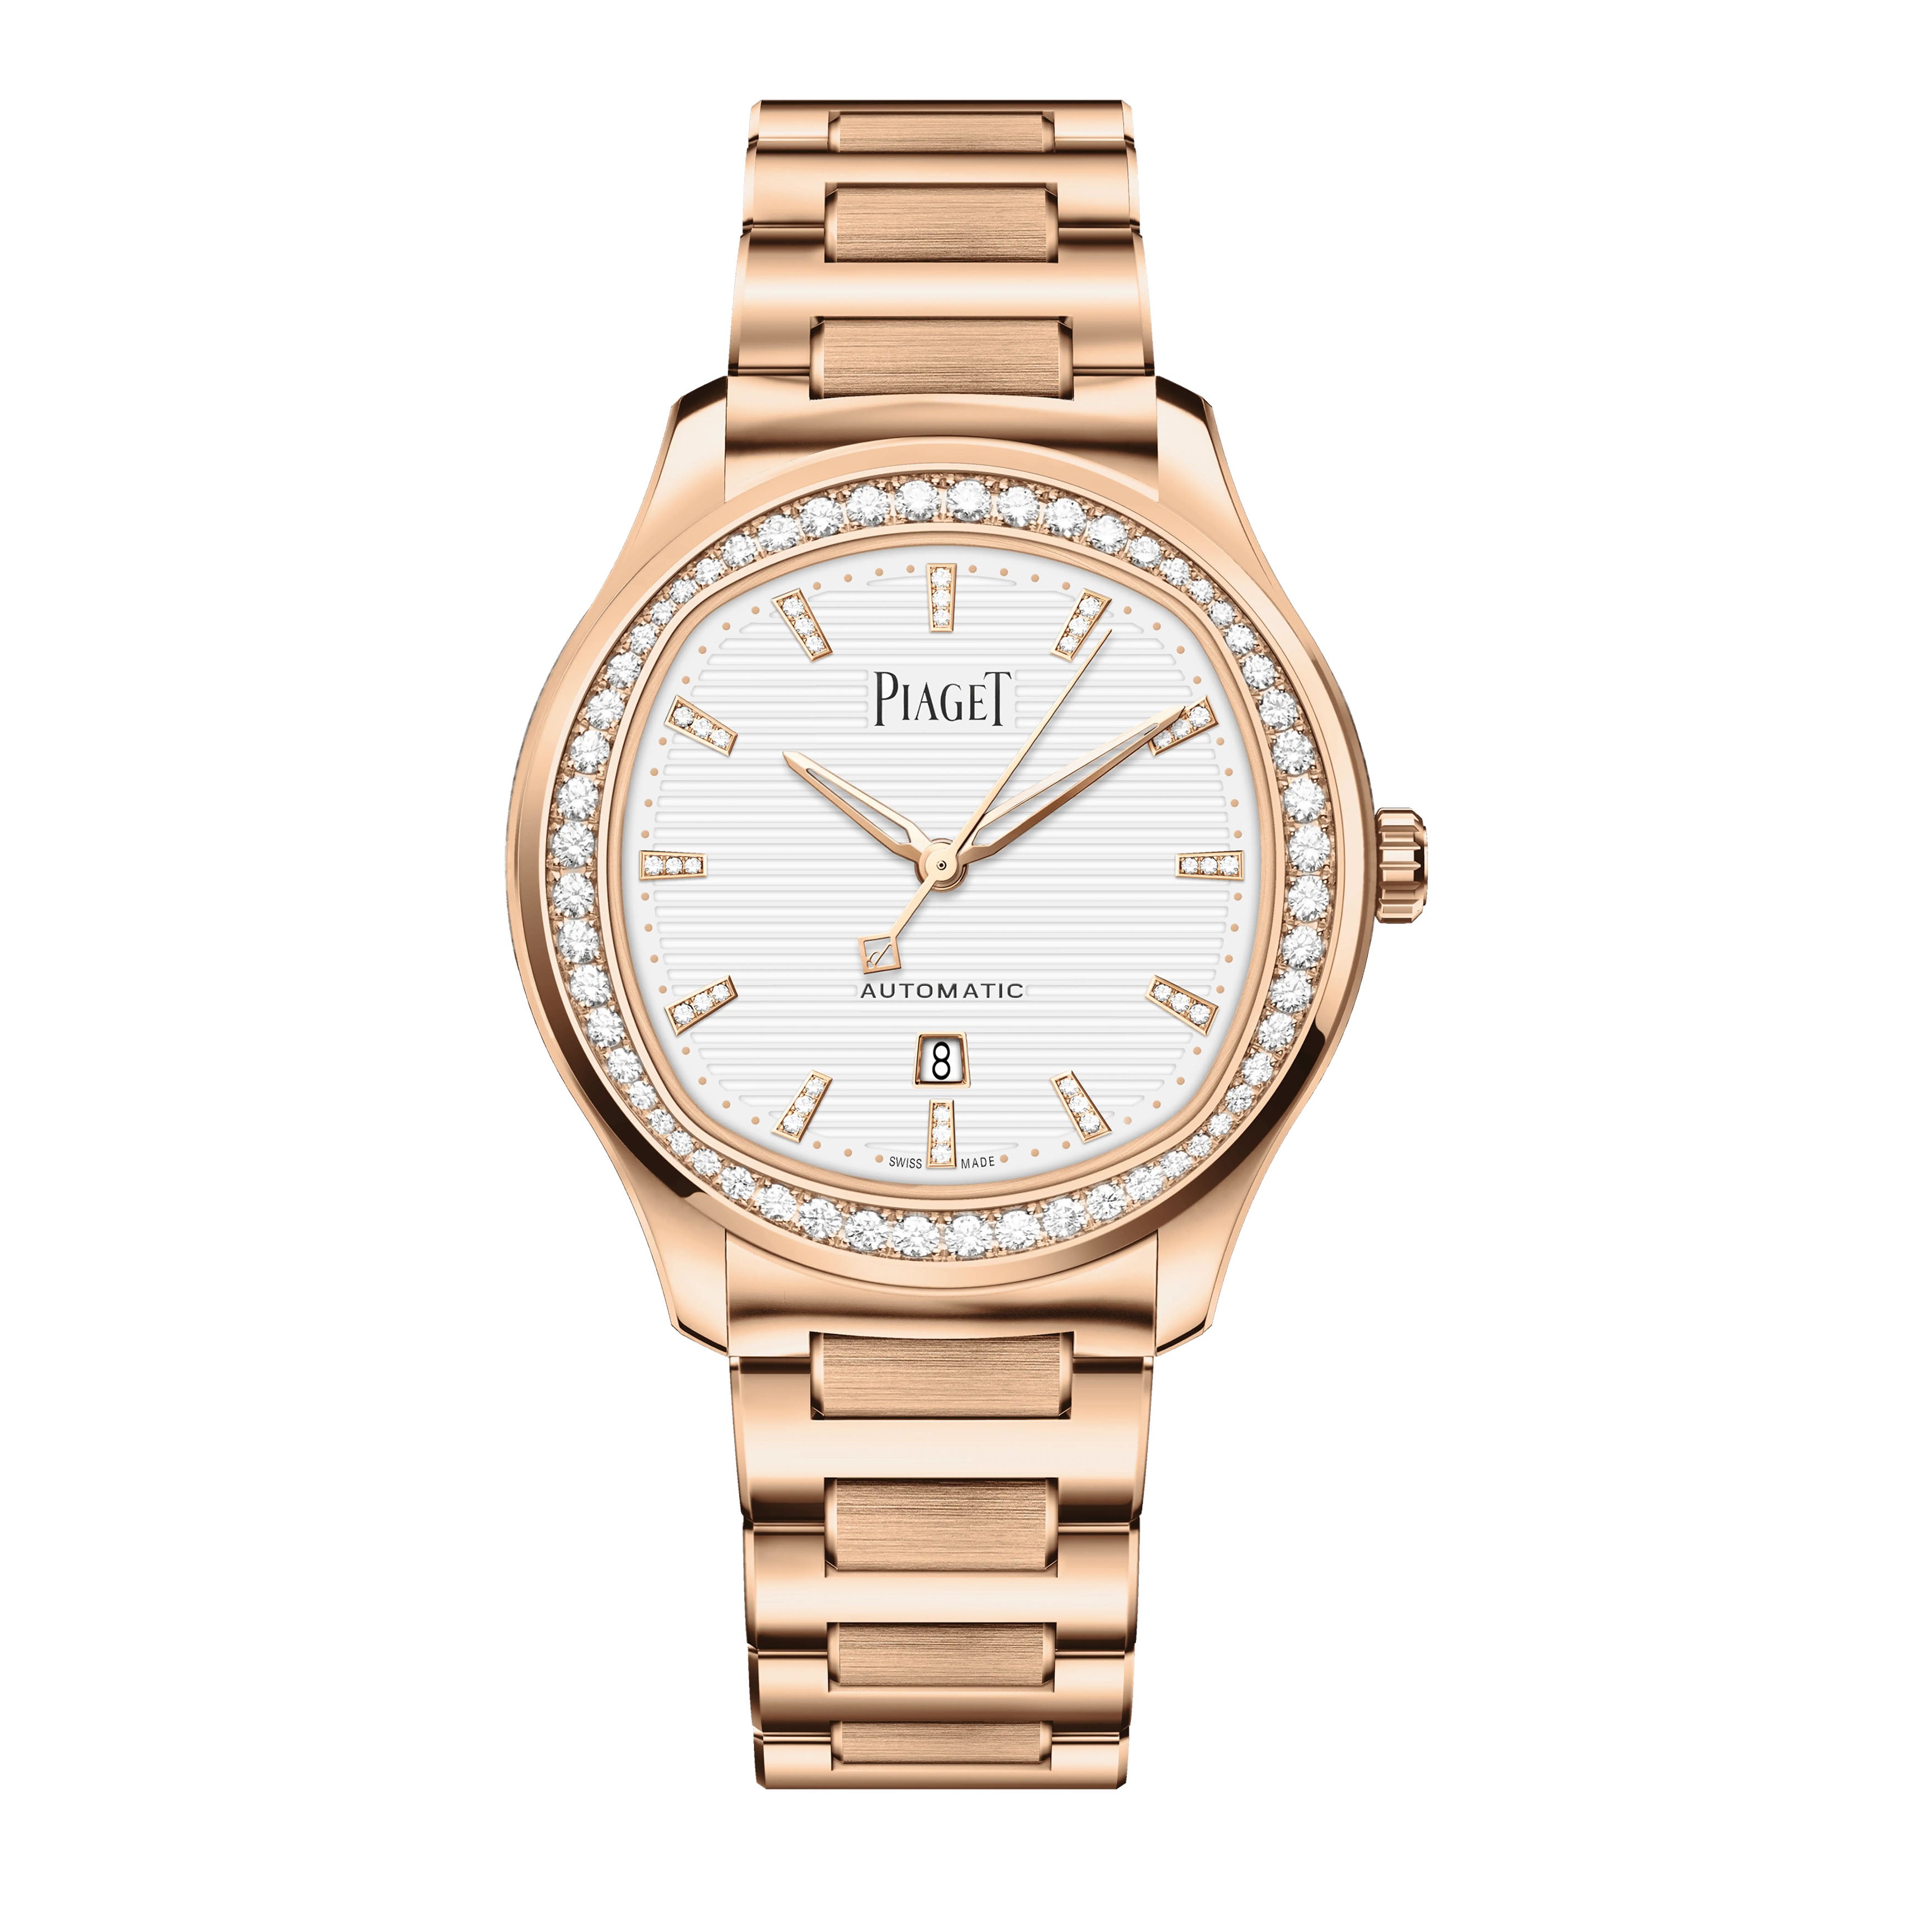 Piaget Polo Date Watch, 36mm White Dial, G0A46020